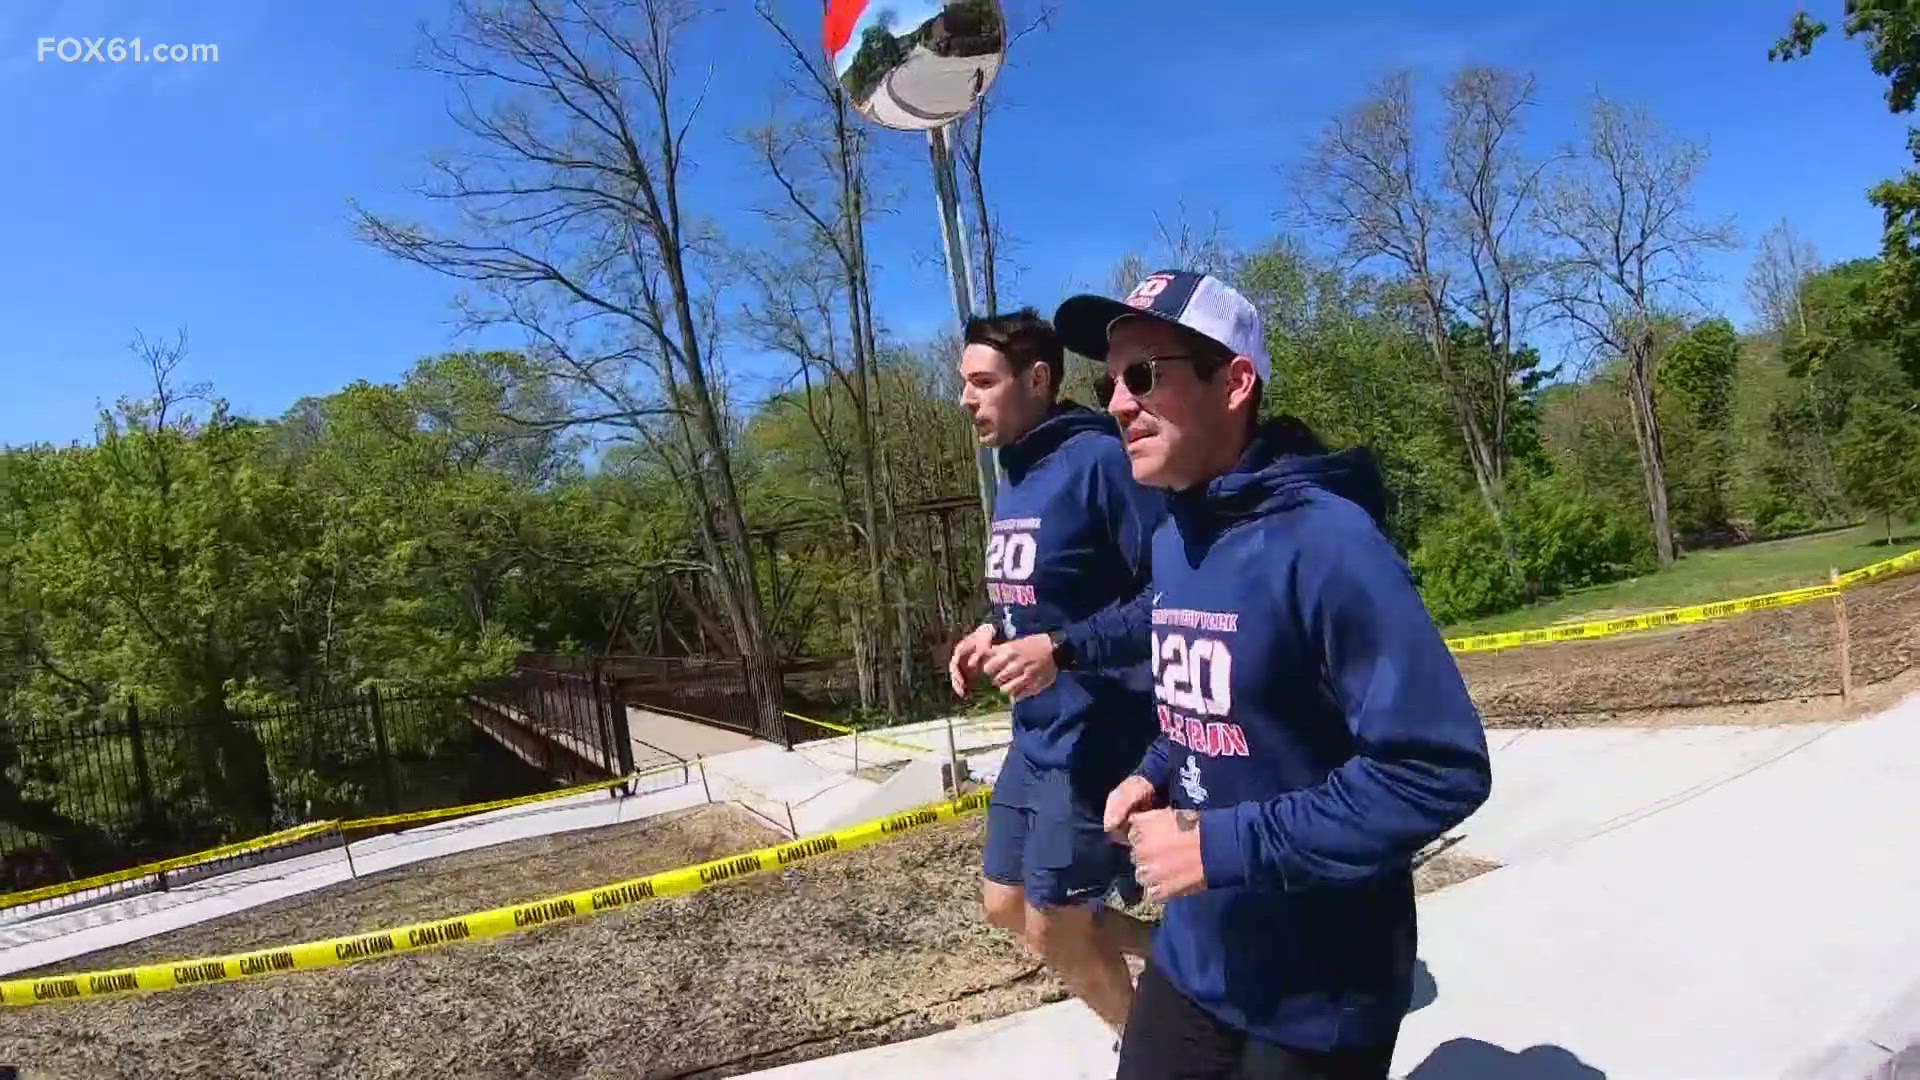 Two cousins are running from Boston to New York to support the Tunnel to Towers Foundation, raising money for veterans, first responders and Gold Star families.